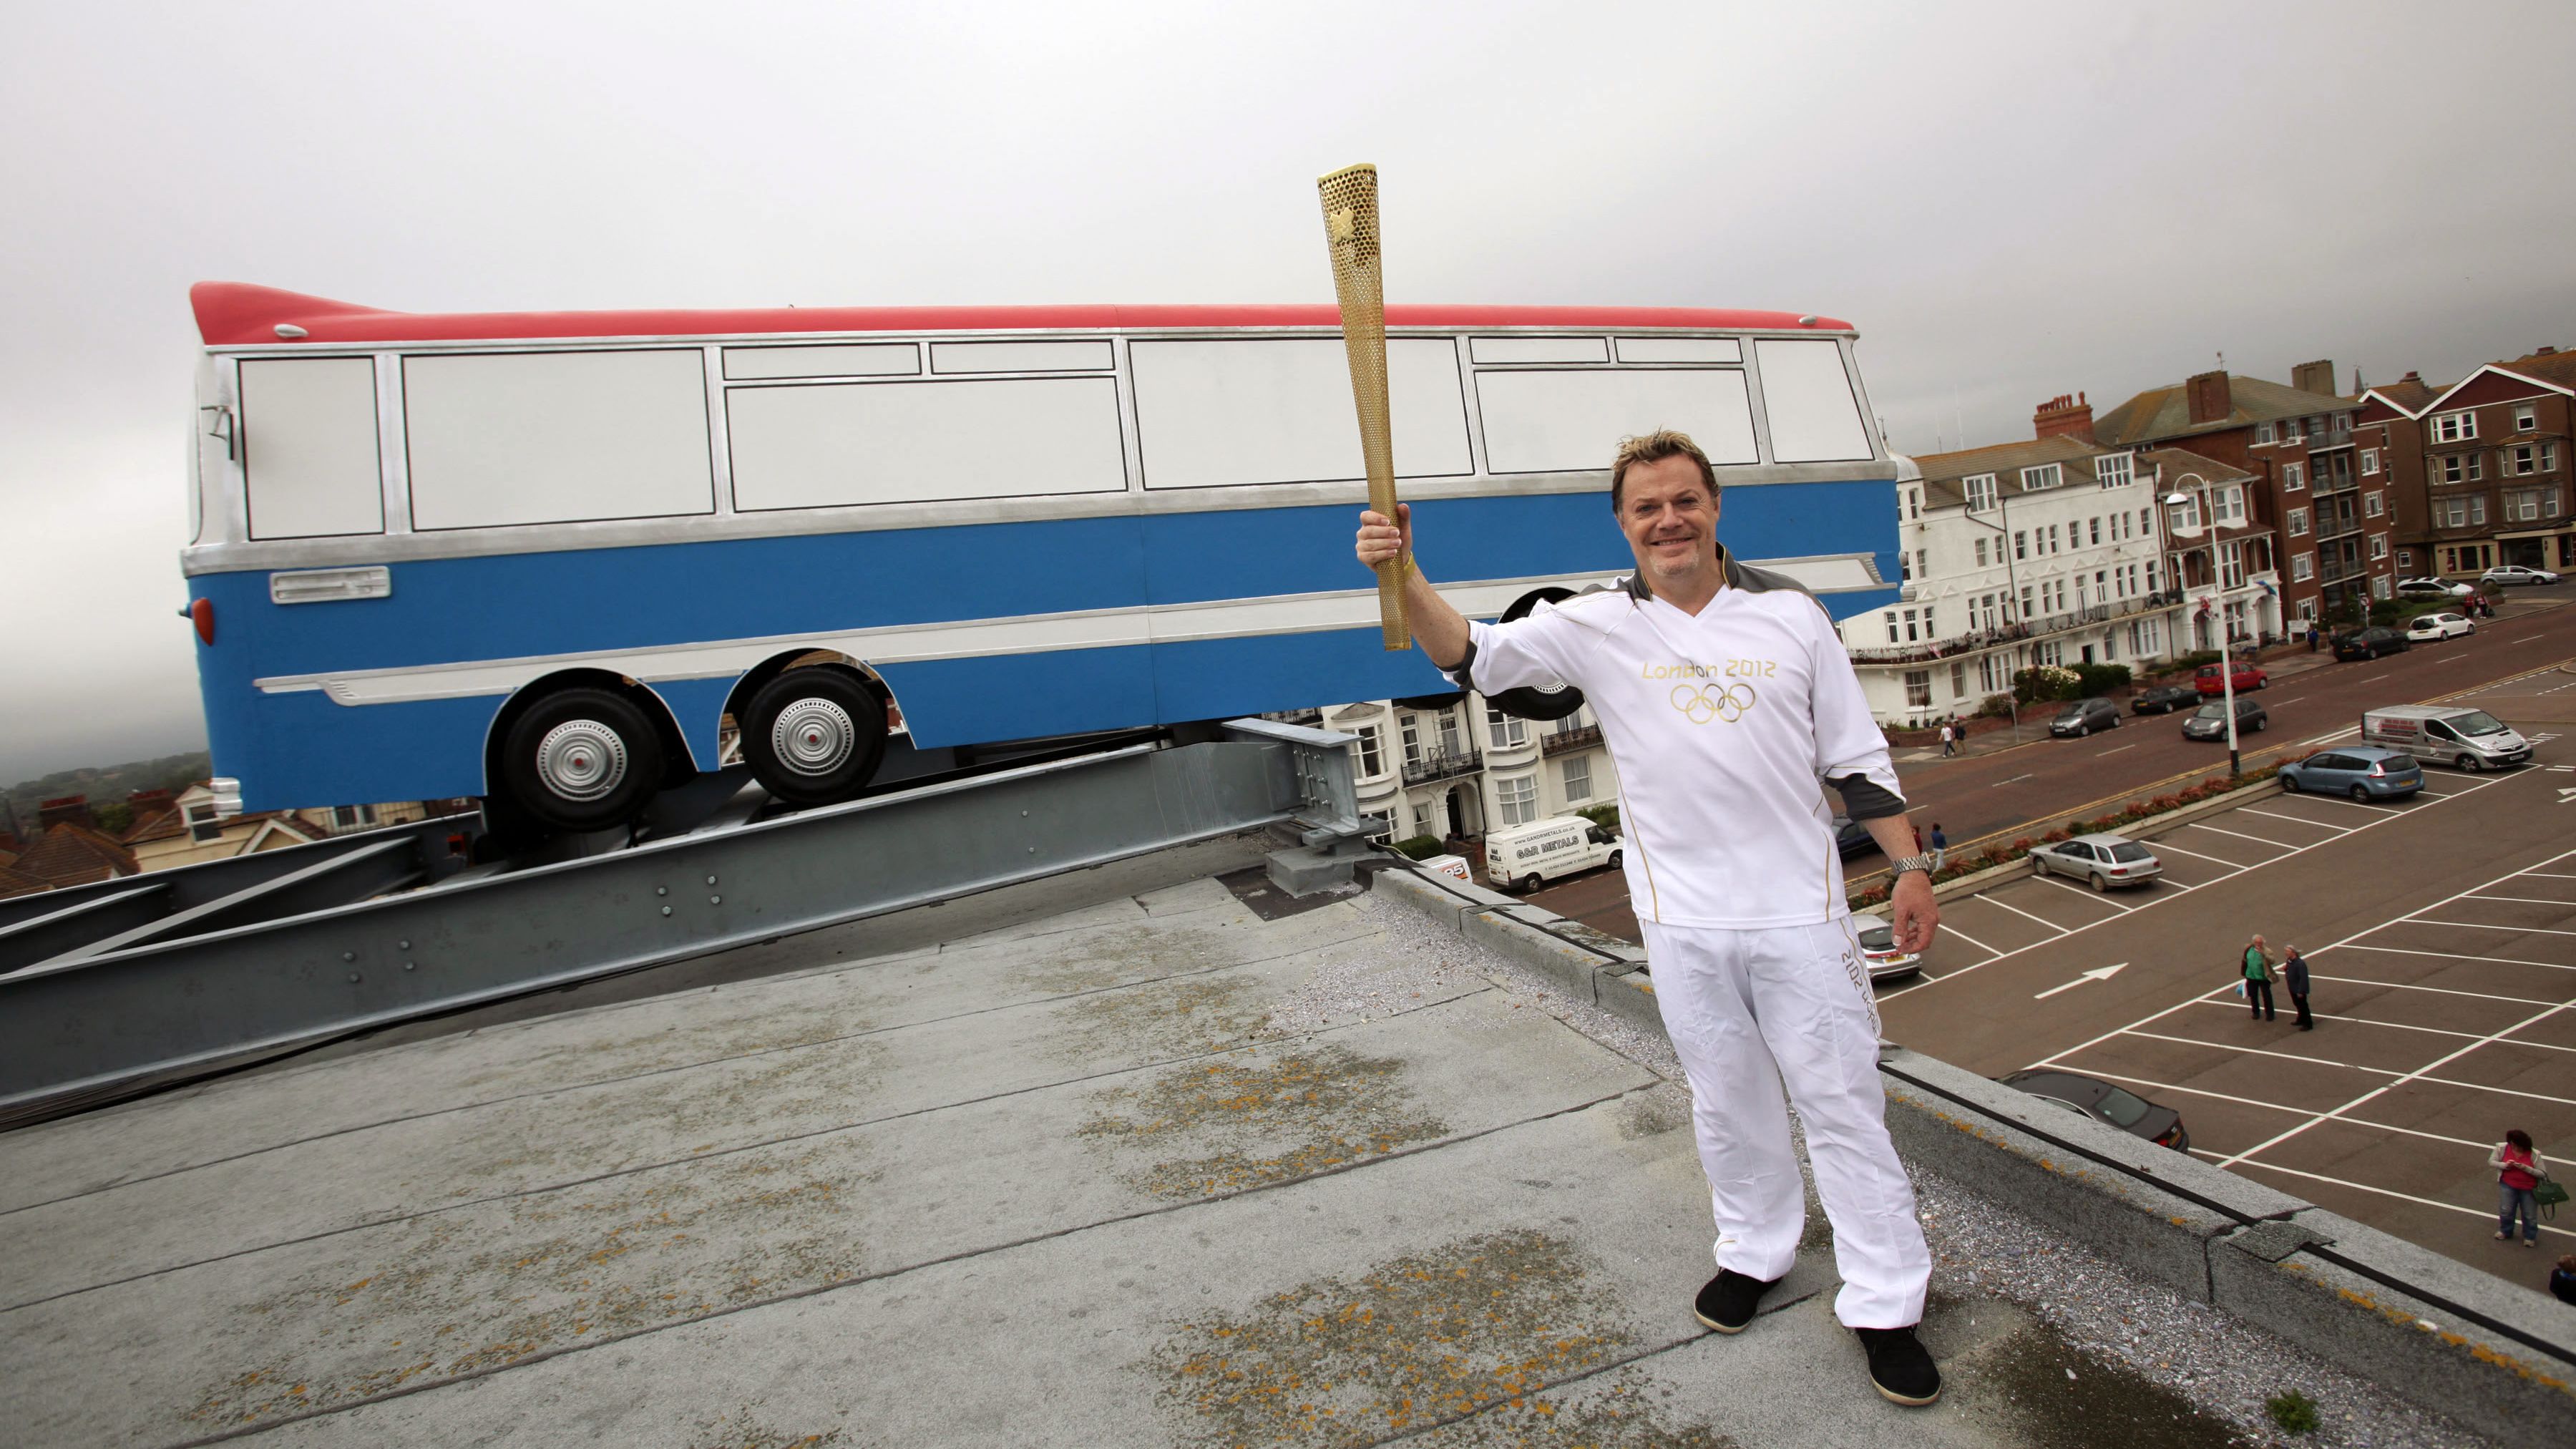 Comedian and actor Eddie Izzard carried the Olympic Torch on its journey around Britain prior to the London 2012 Games.